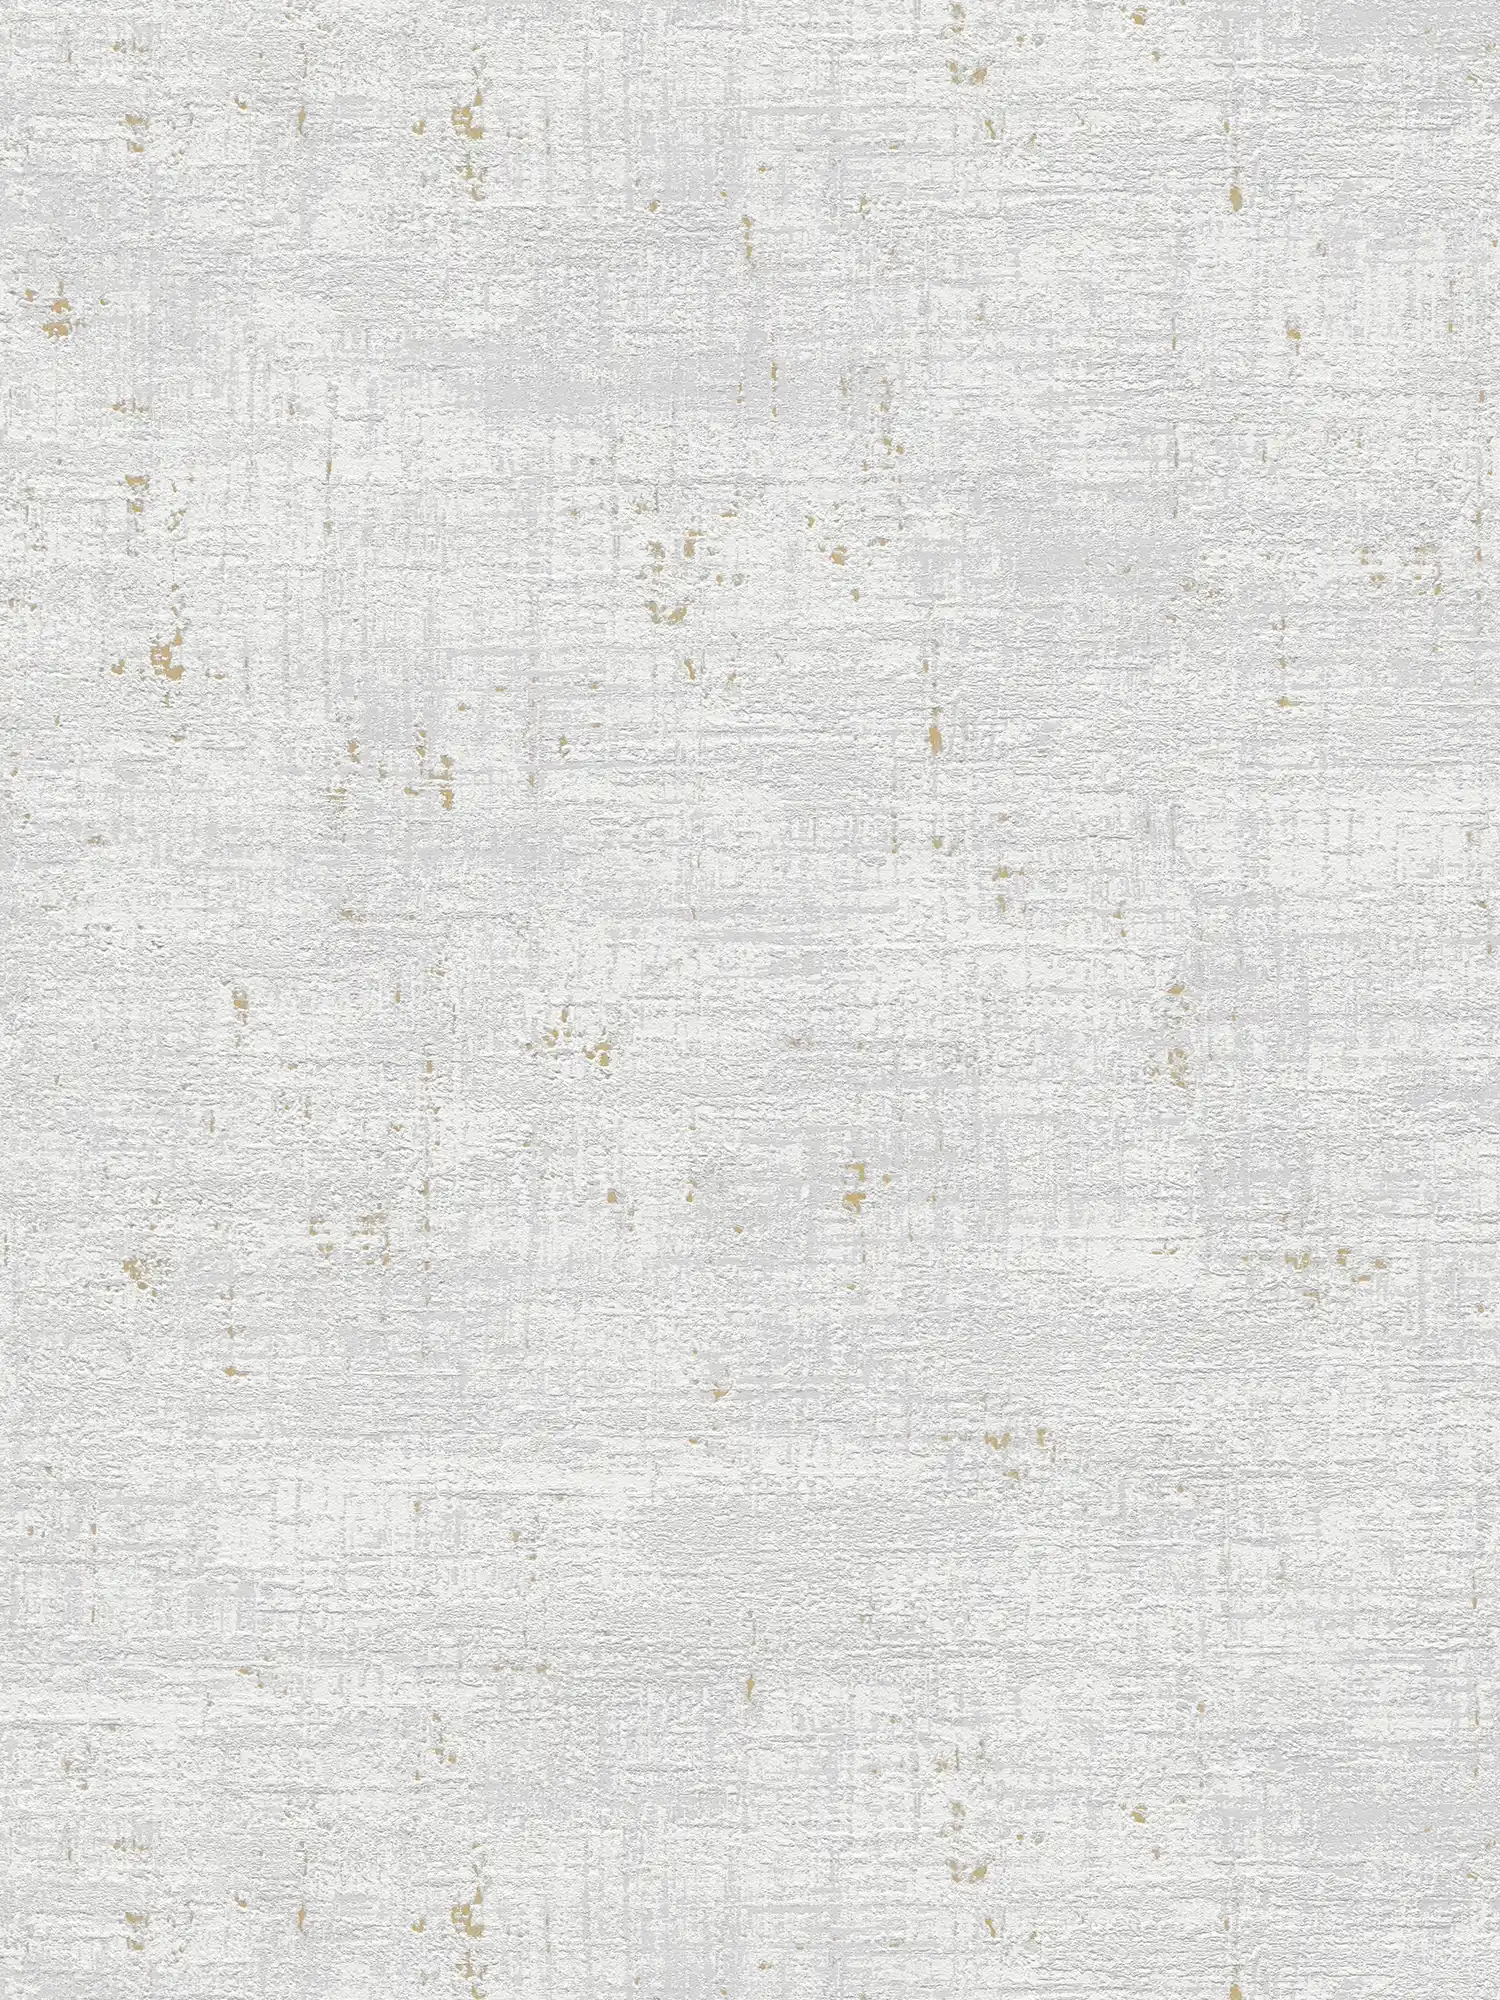         Non-woven wallpaper with metallic effects - grey, cream, gold
    